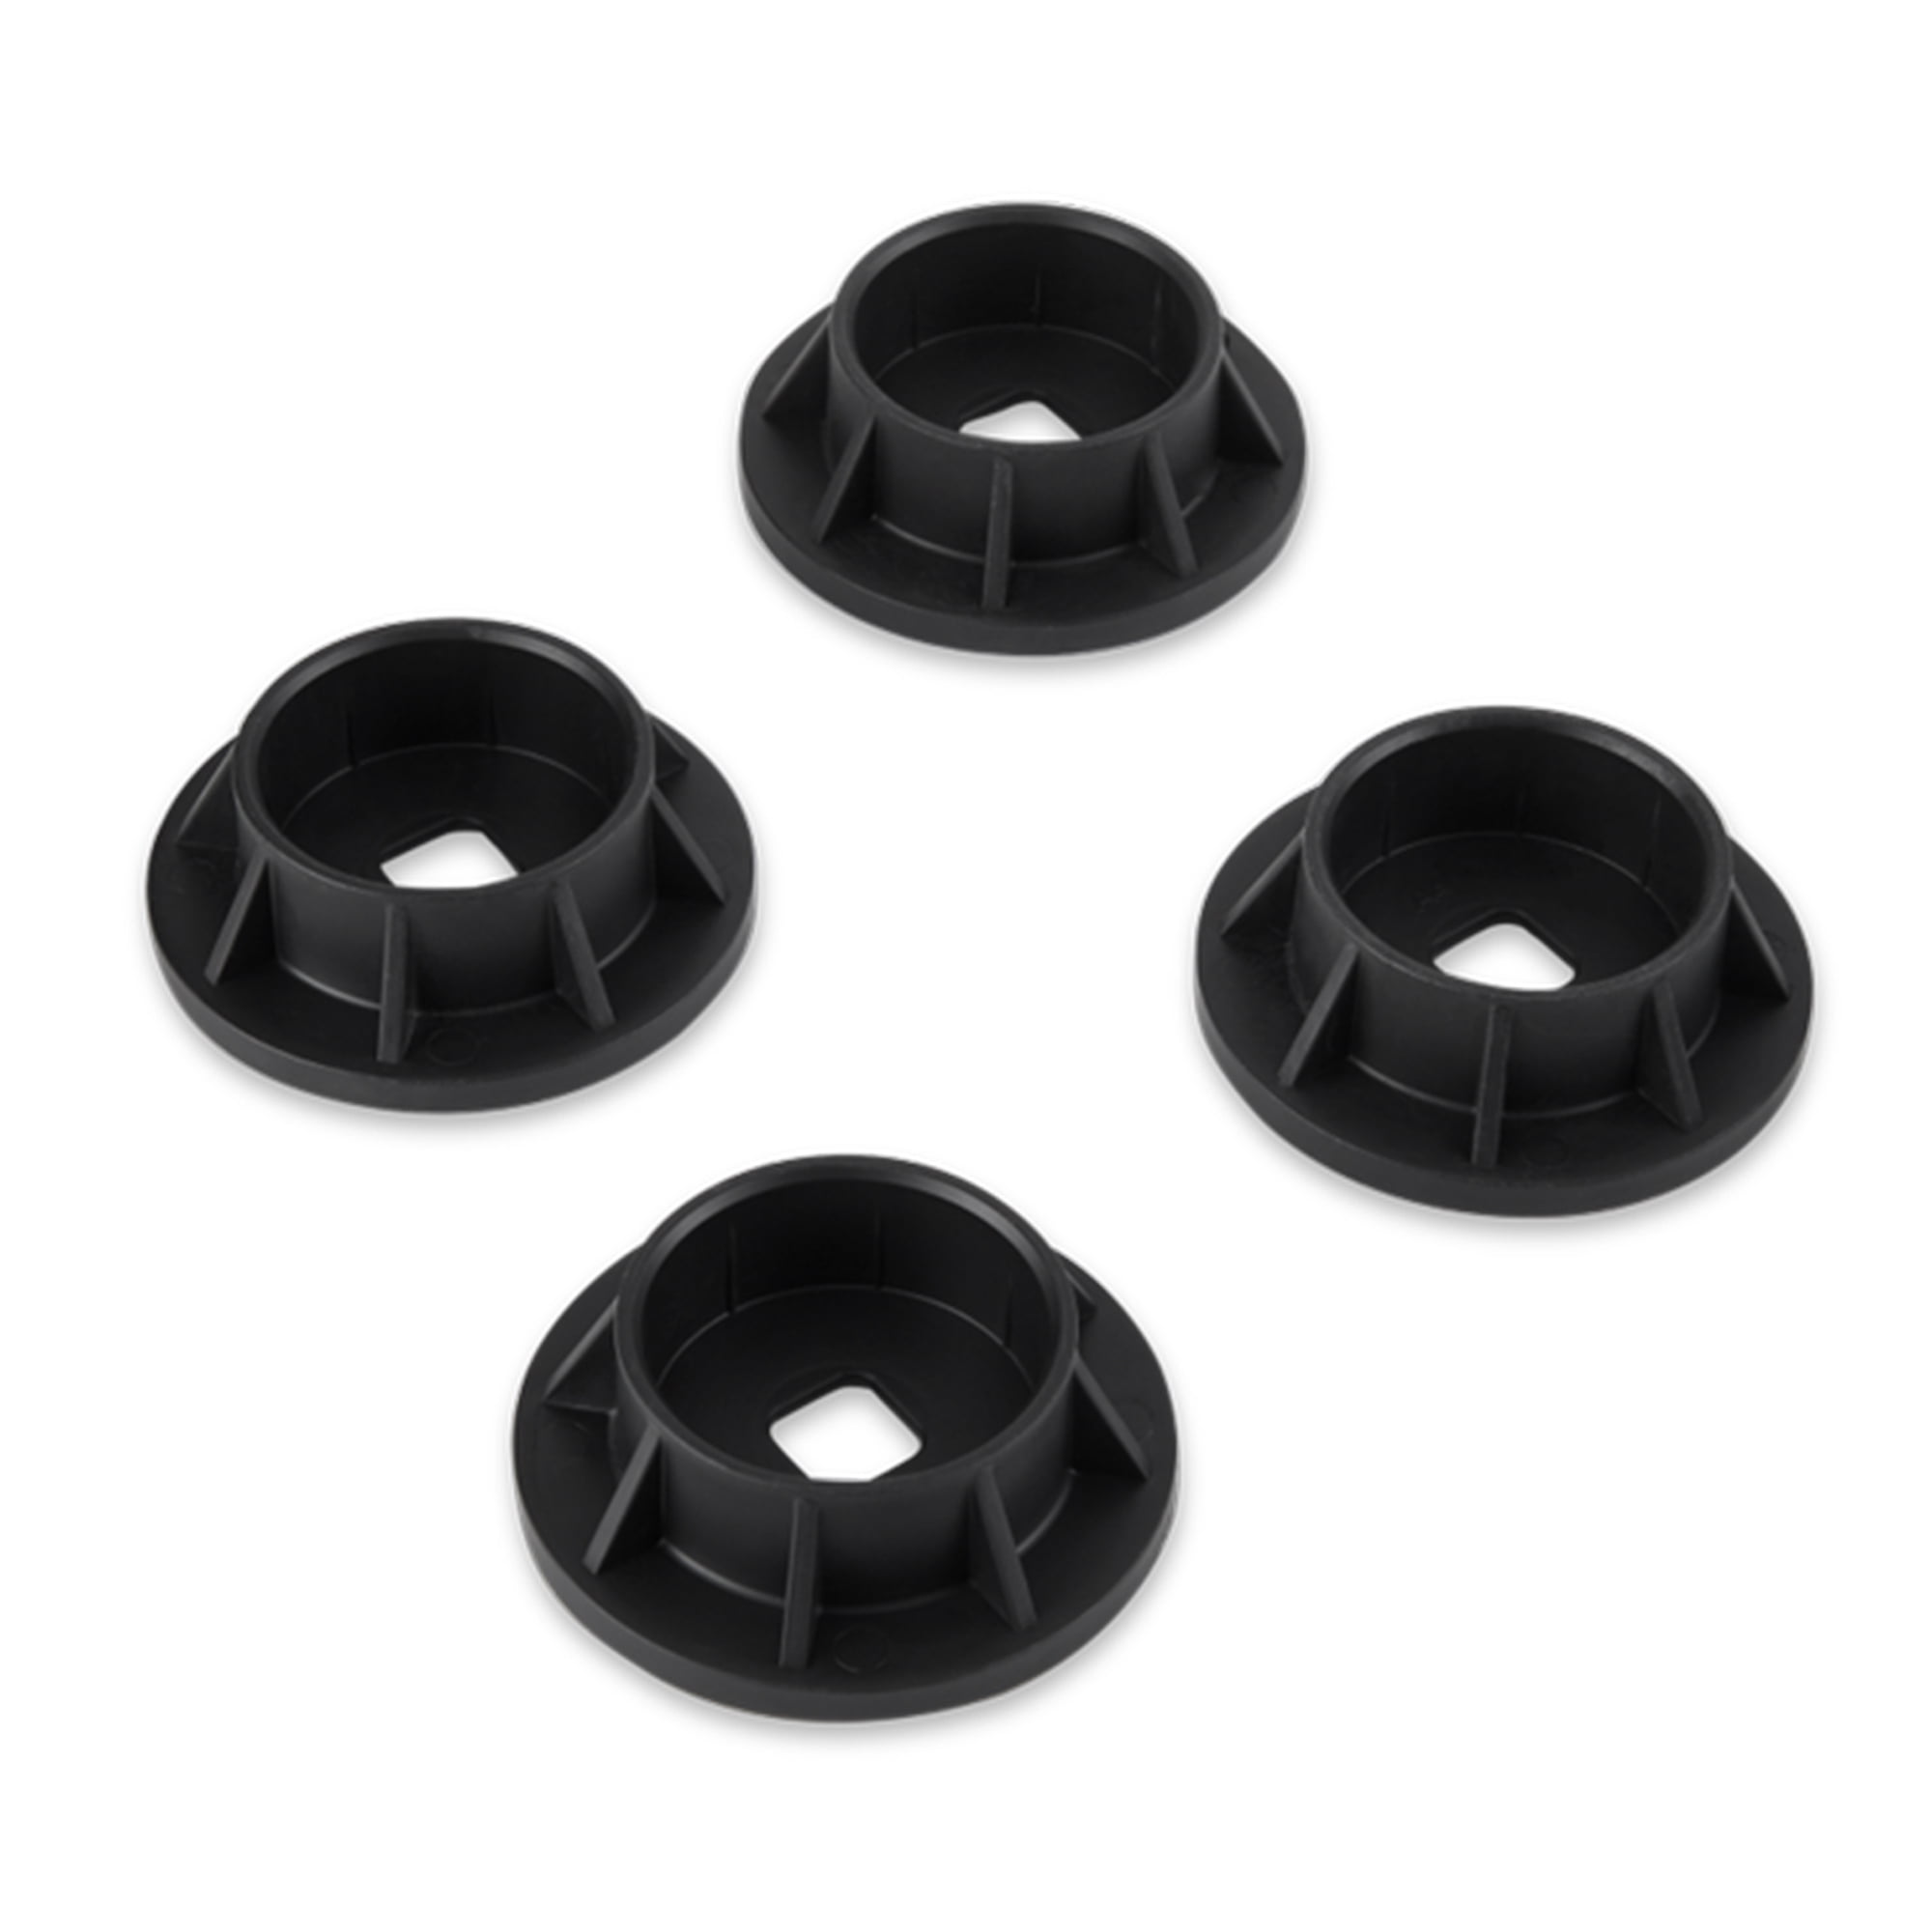 16 Model 4-Pack Replacement Leg Caps for Intex 3'-16' Round MF Pools 